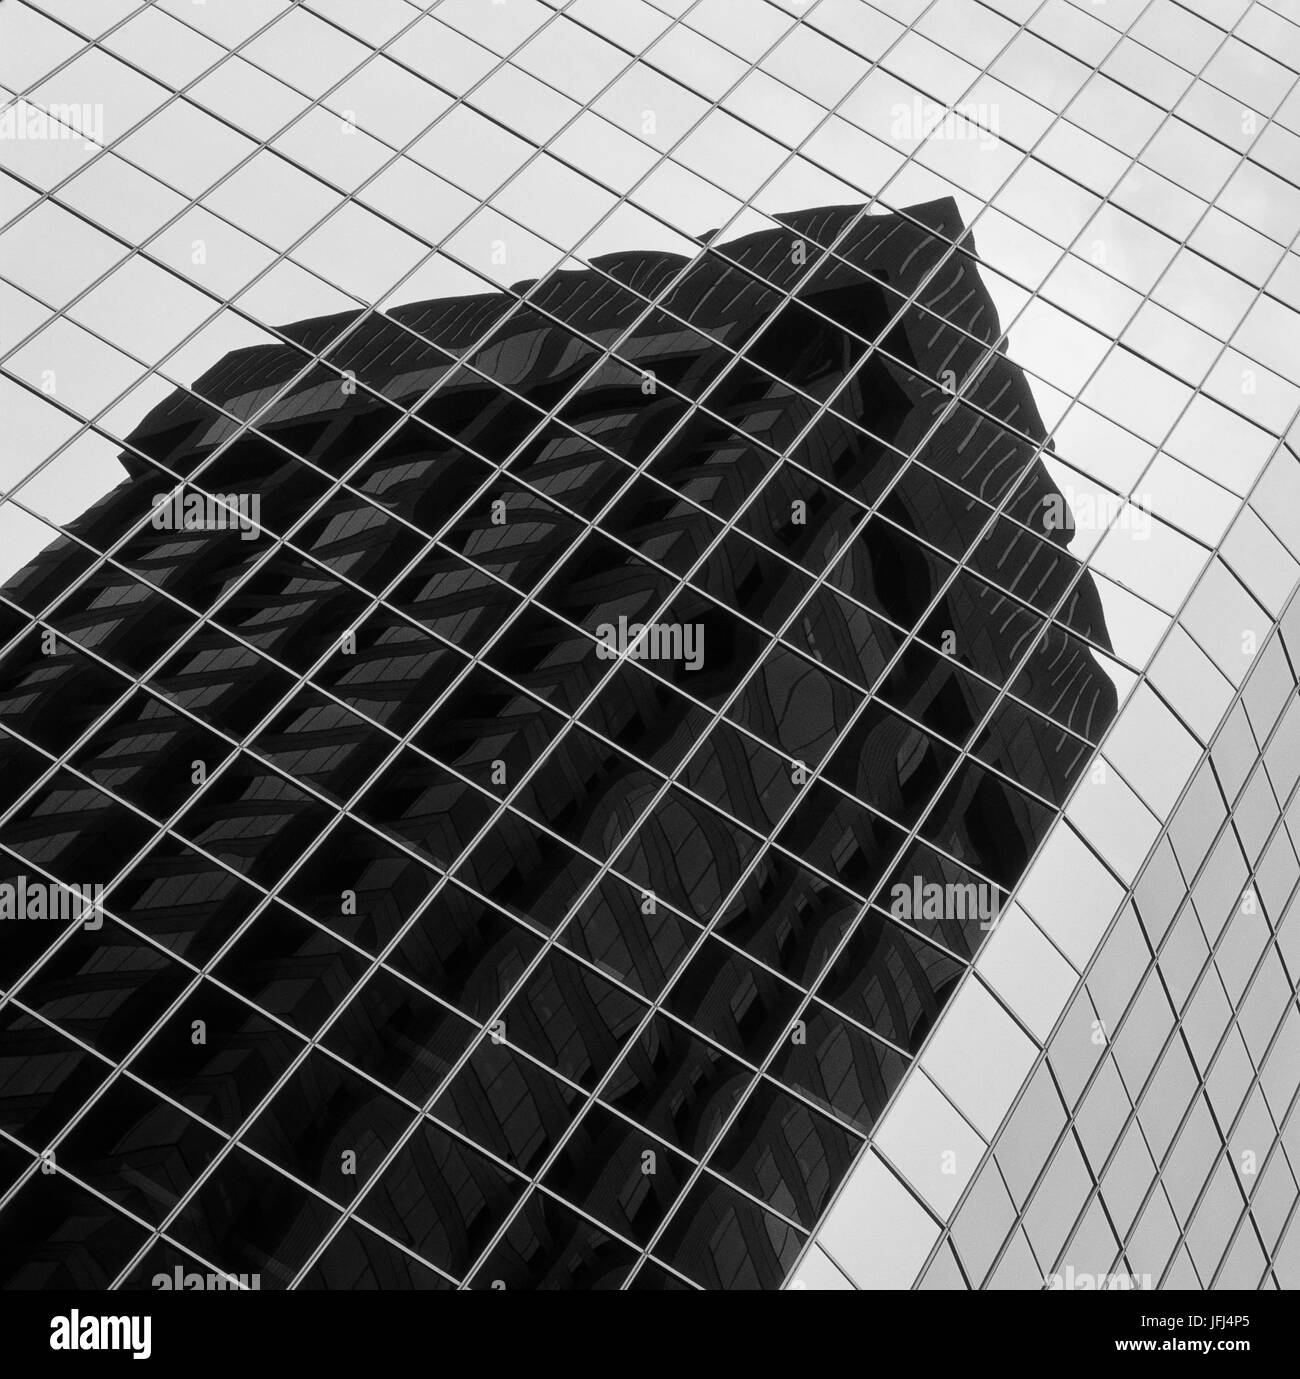 High-rise office block facade of glass and concrete, mirroring, s/w Stock Photo